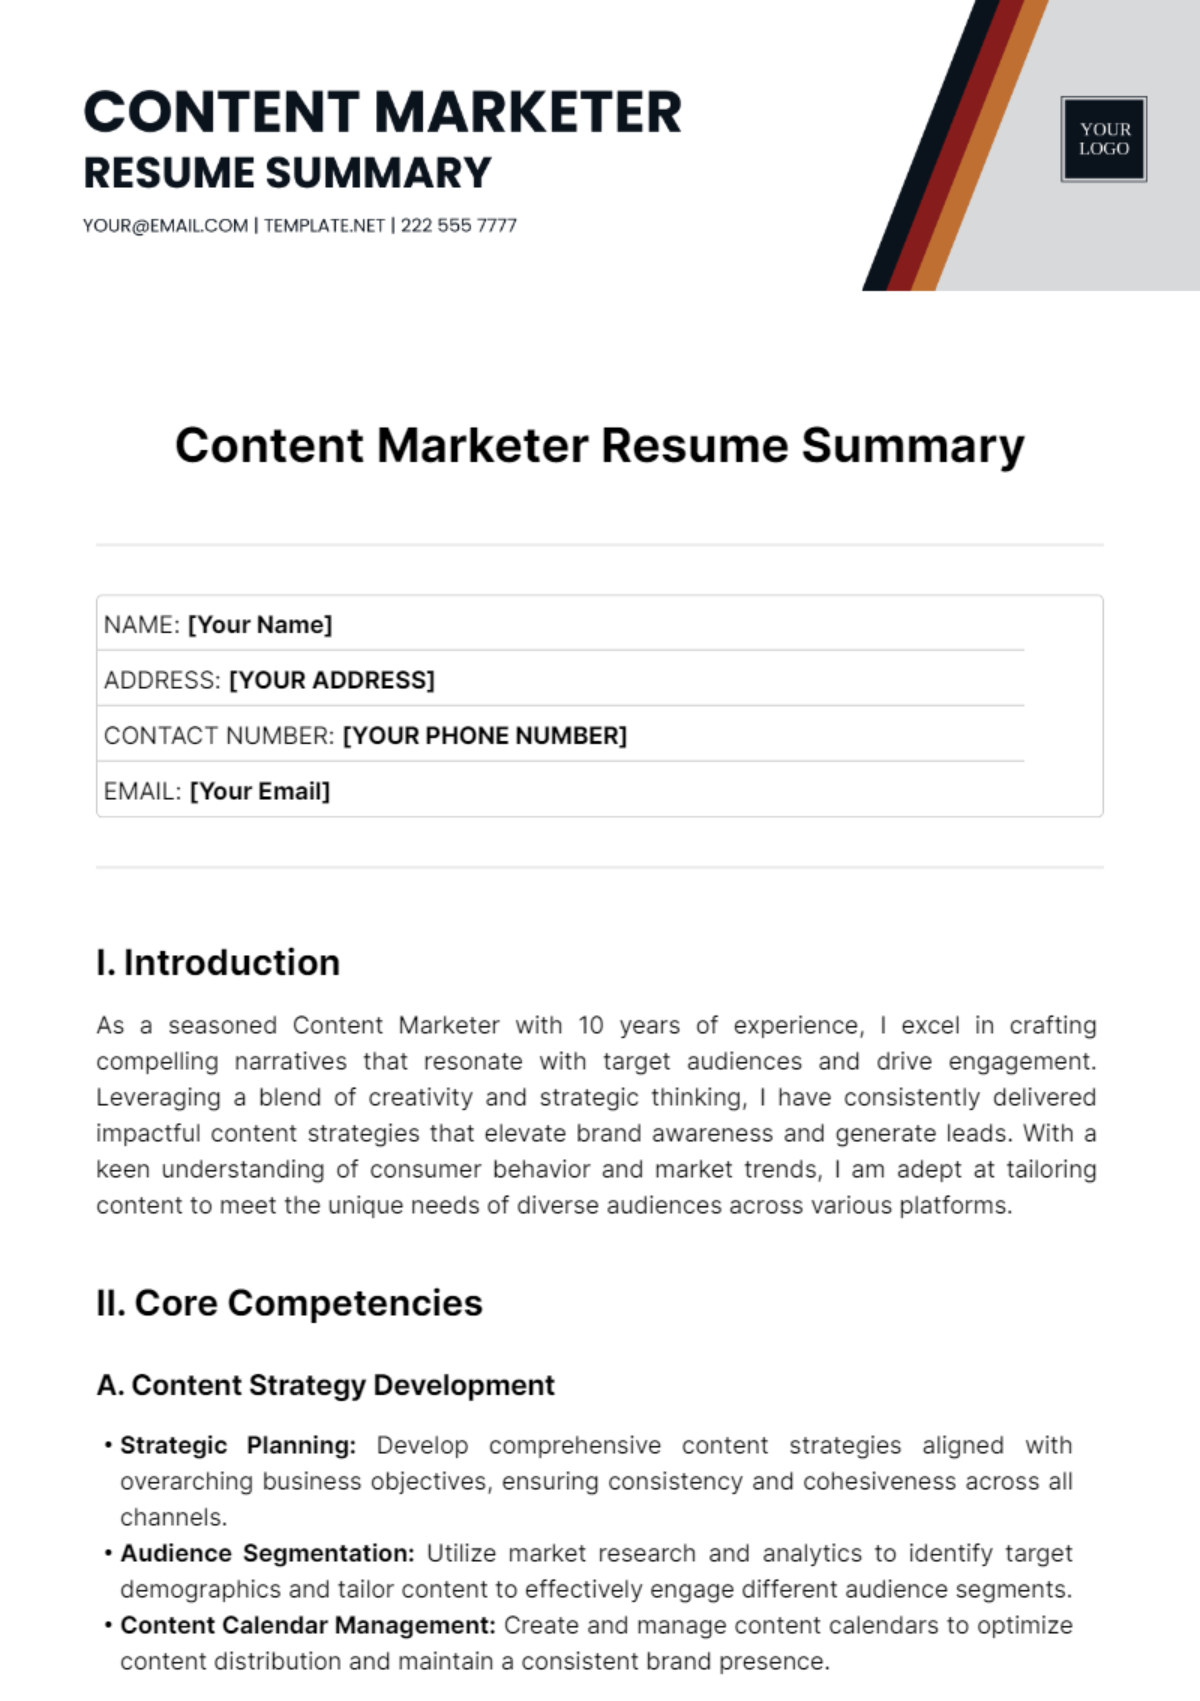 Free Content Marketer Resume Summary Template